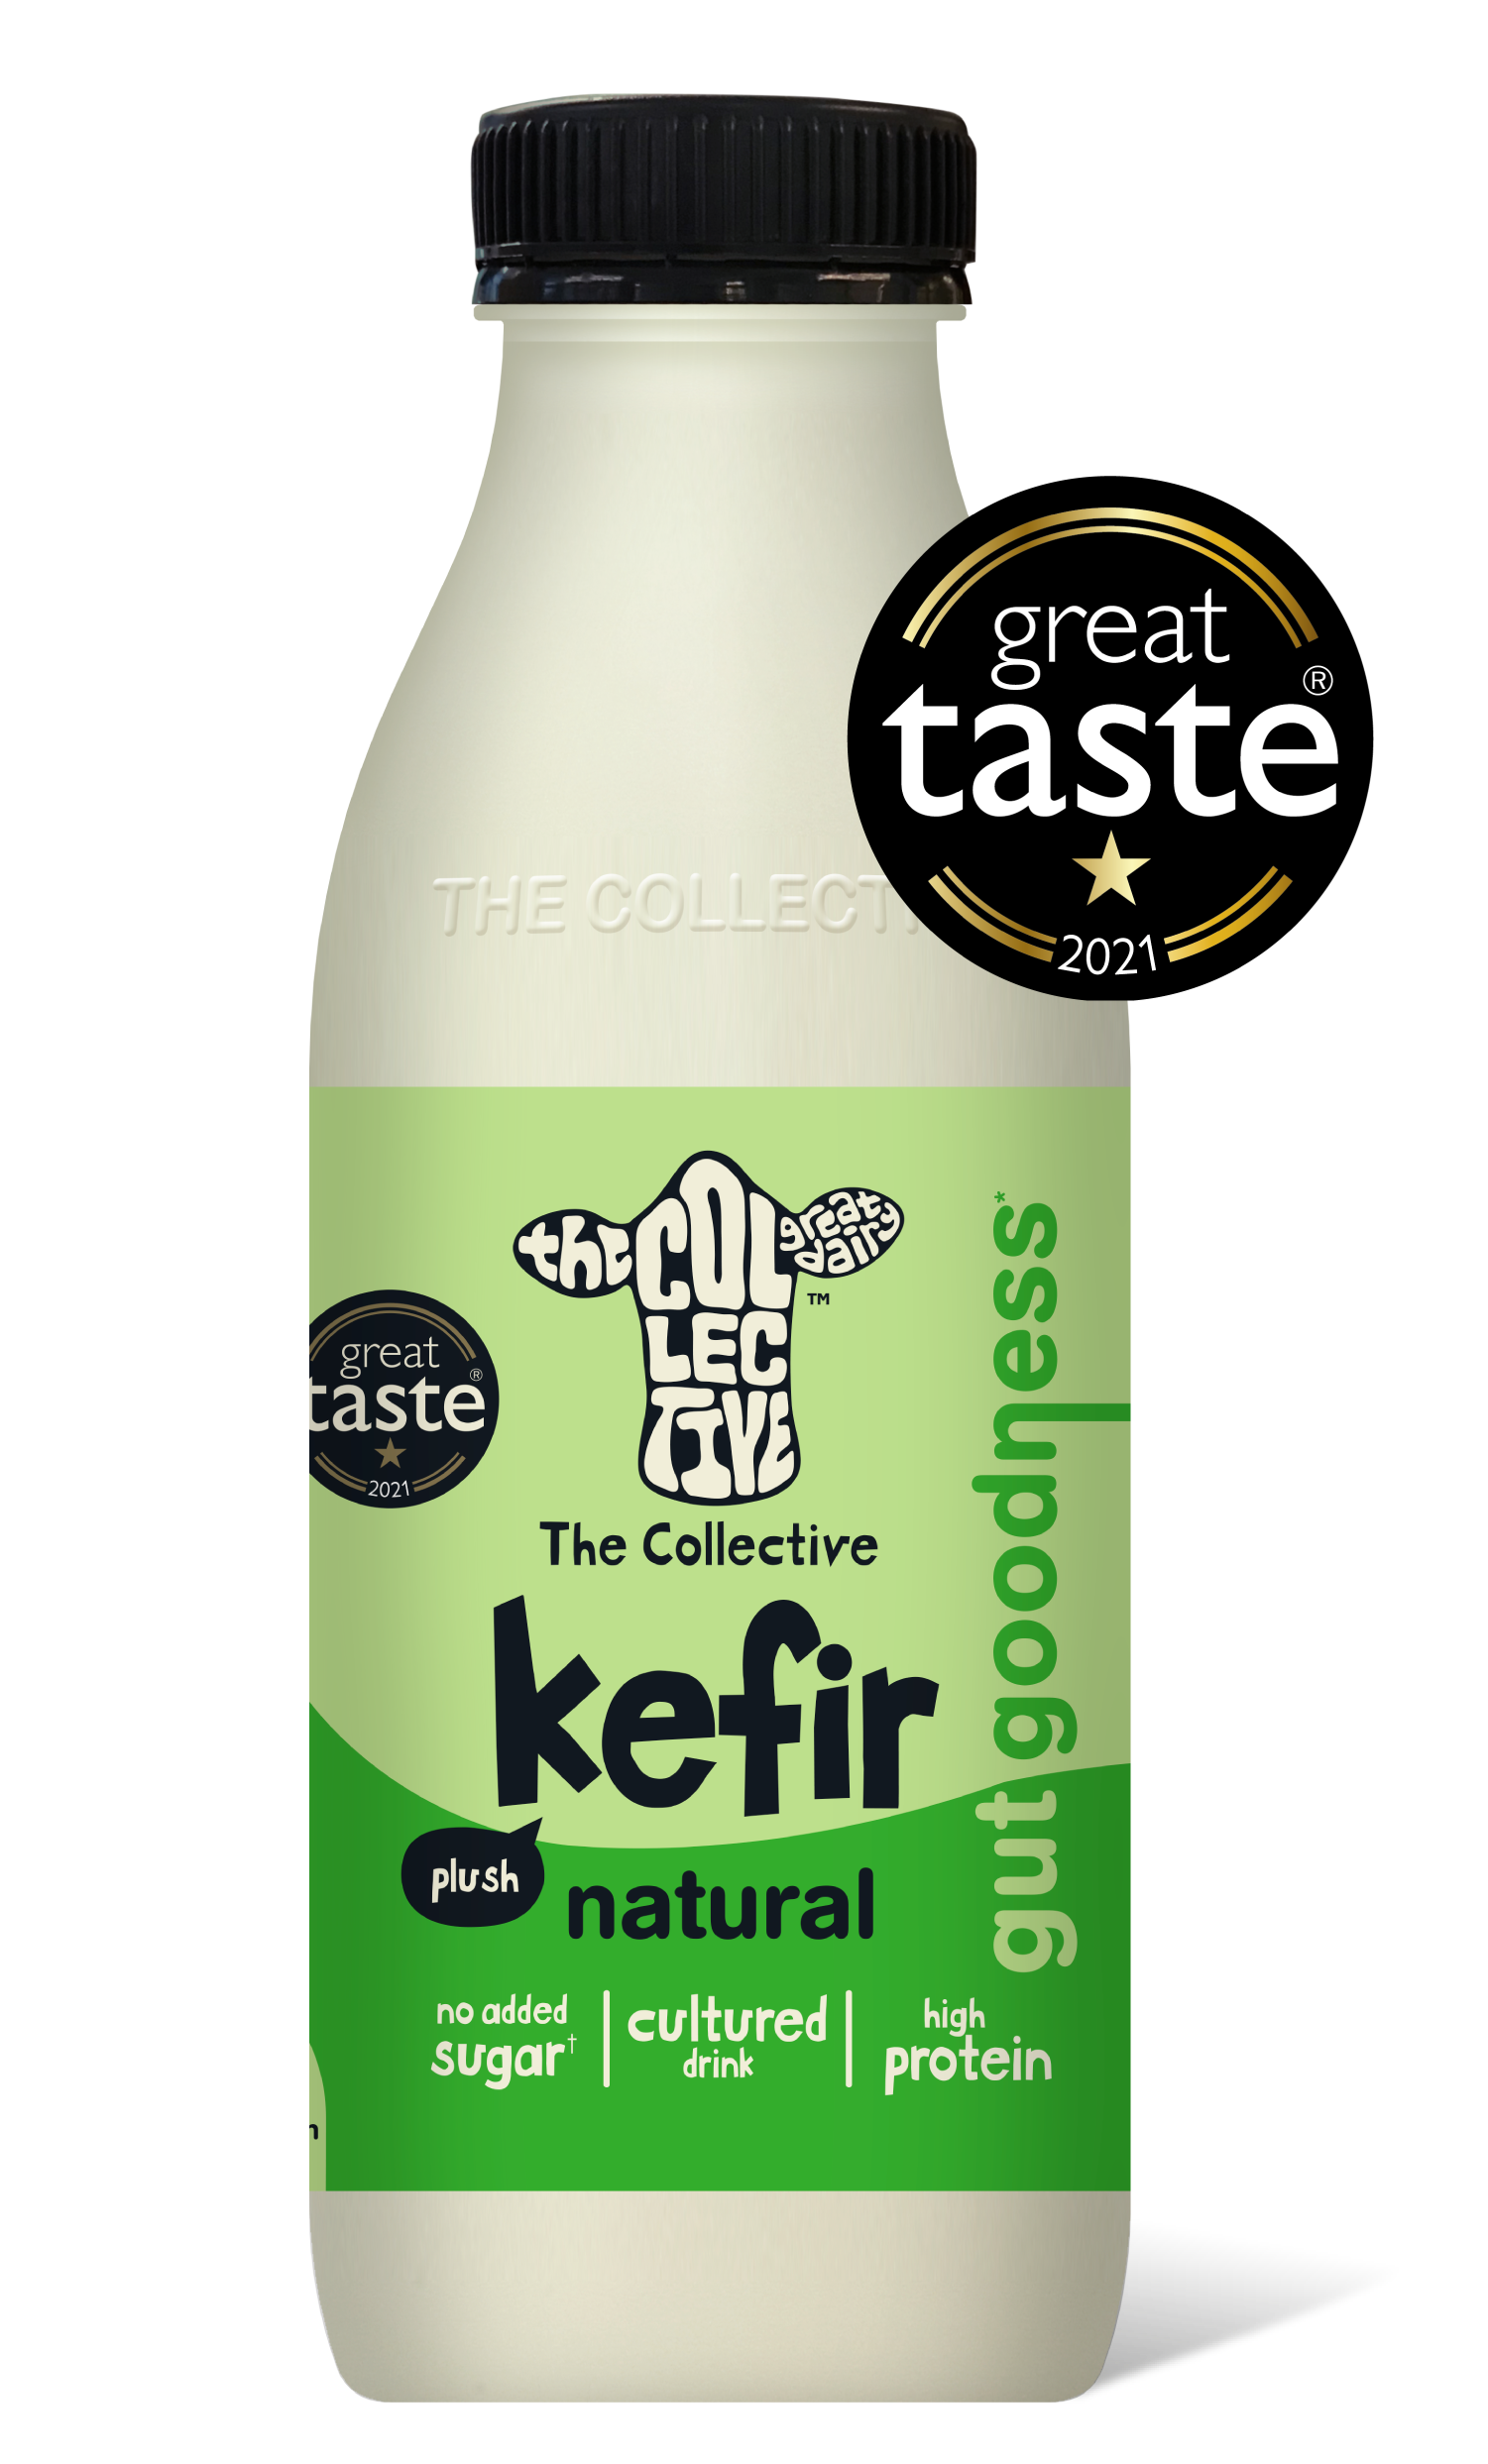 Natural Kefir 500ml  The Collective, great dairyno bull